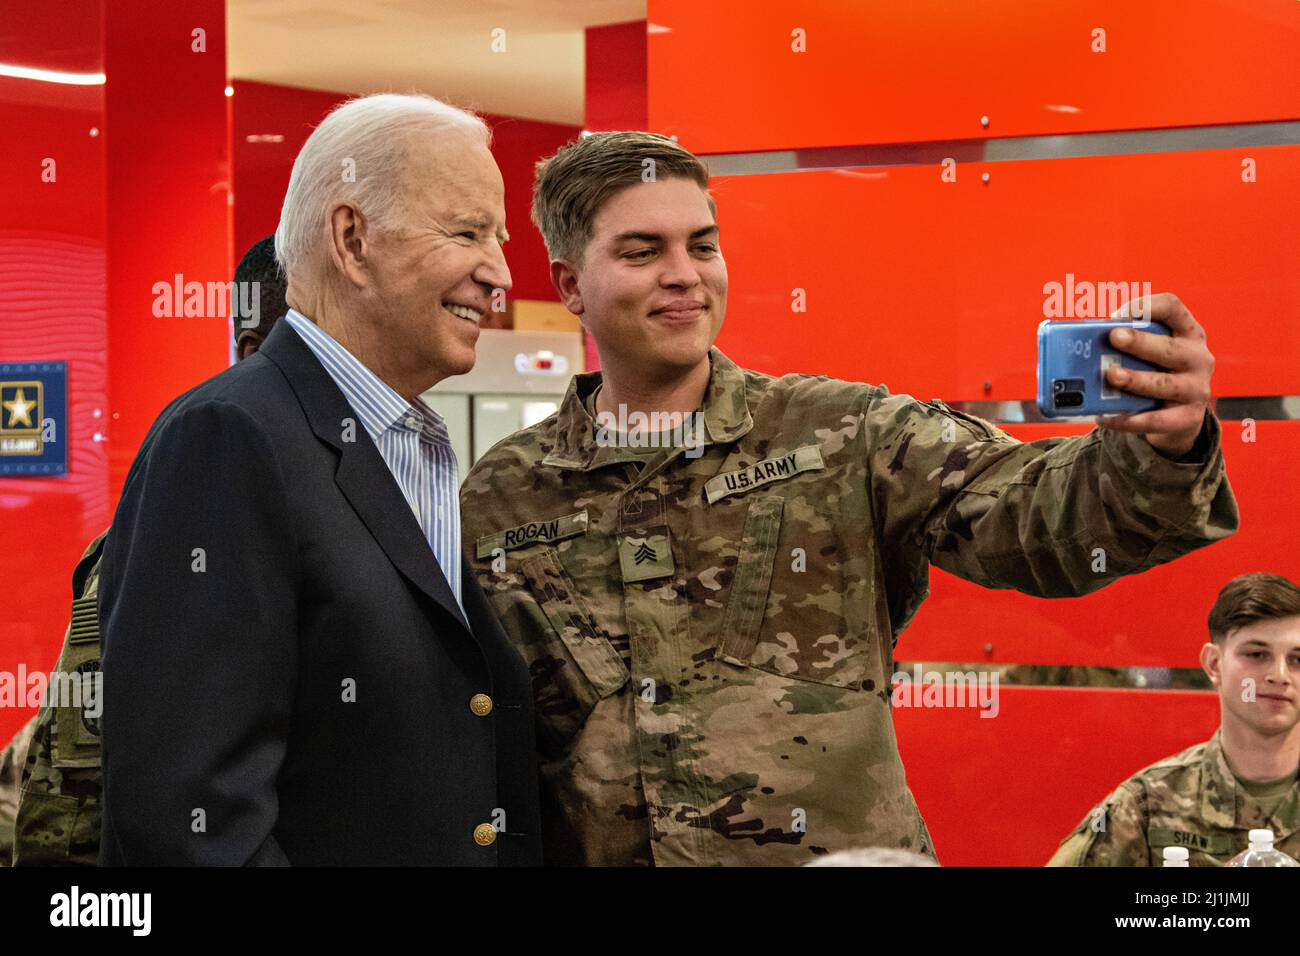 Jasionka, Poland. 25th Mar, 2022. U.S President Joe Biden, takes selfies while visiting paratroopers with the 82nd Airborne Division deployed with NATO near the Ukraine border, March 25, 2022 in Jasionka, Poland. Credit: Sgt. Gerald Holman/U.S. Army/Alamy Live News Stock Photo